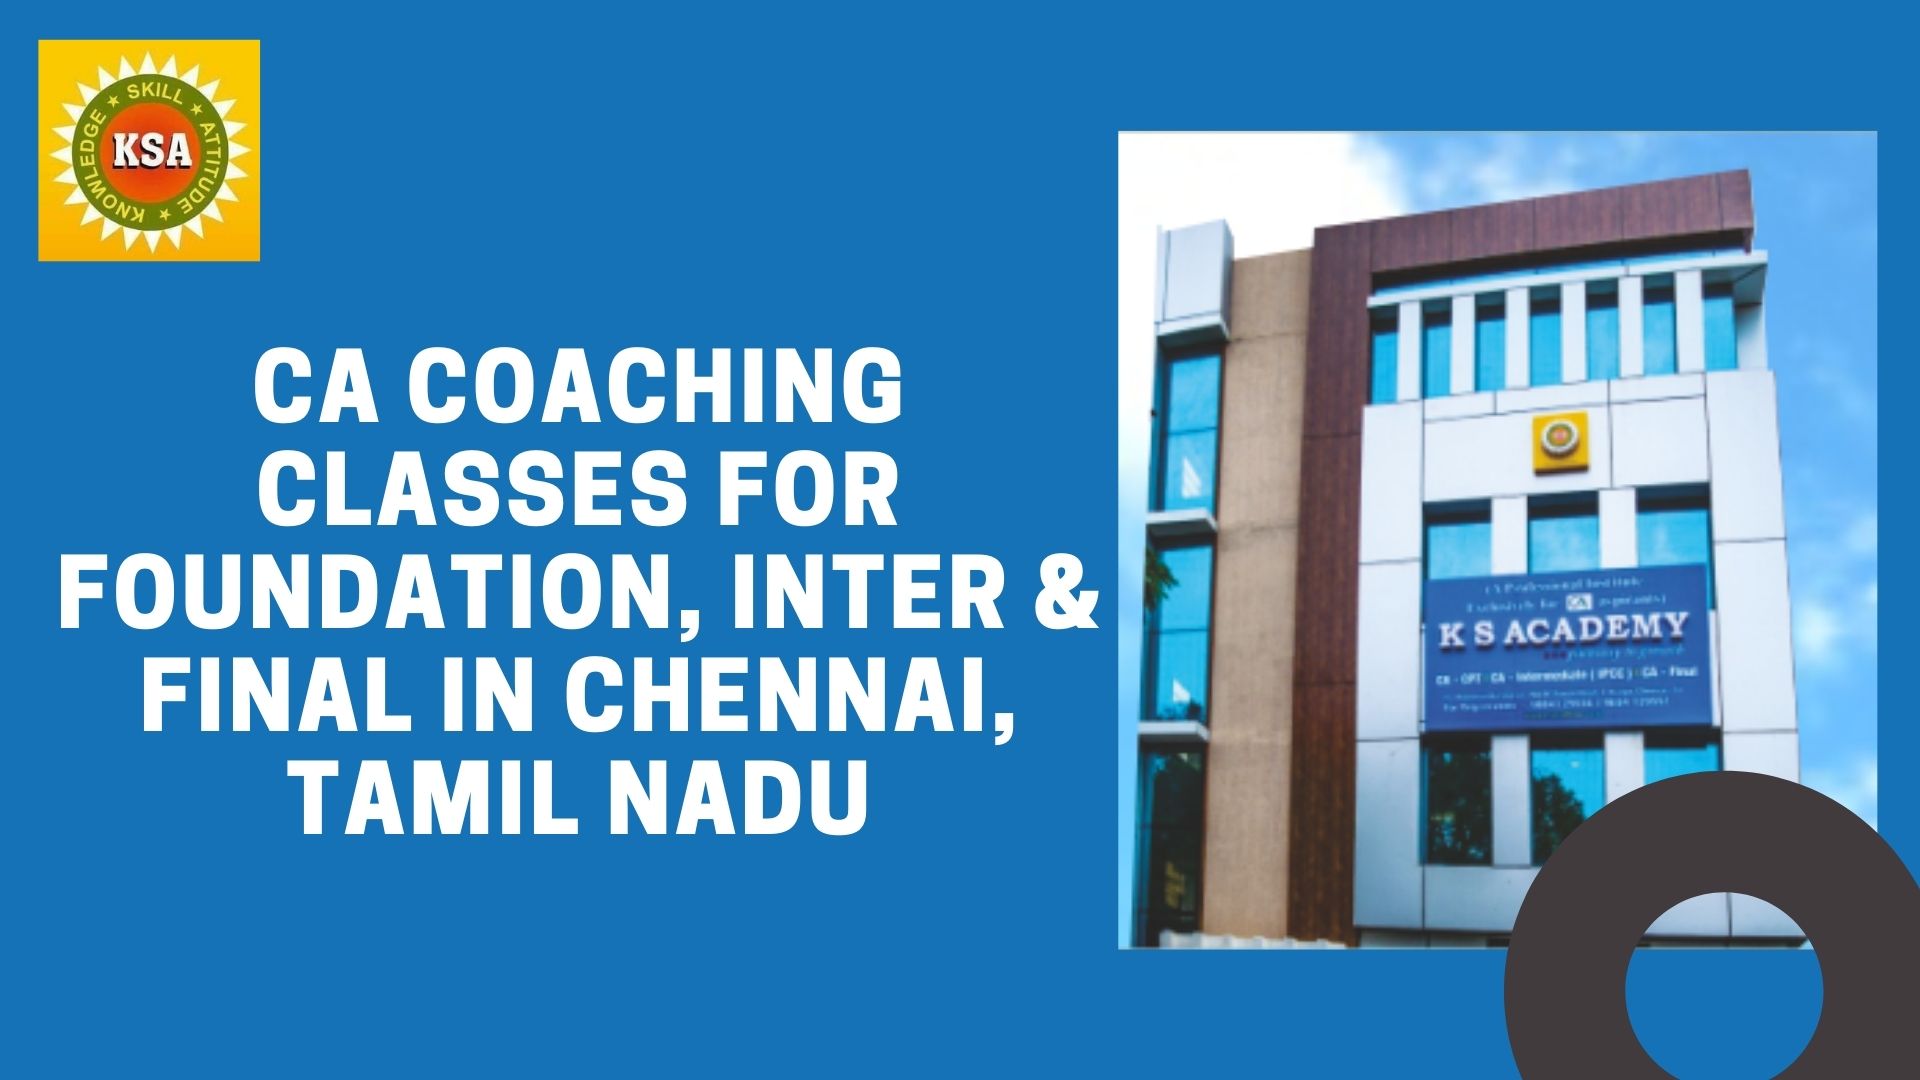 CA Coaching Classes for Foundation, Inter & Final in Chennai, Tamil Nadu